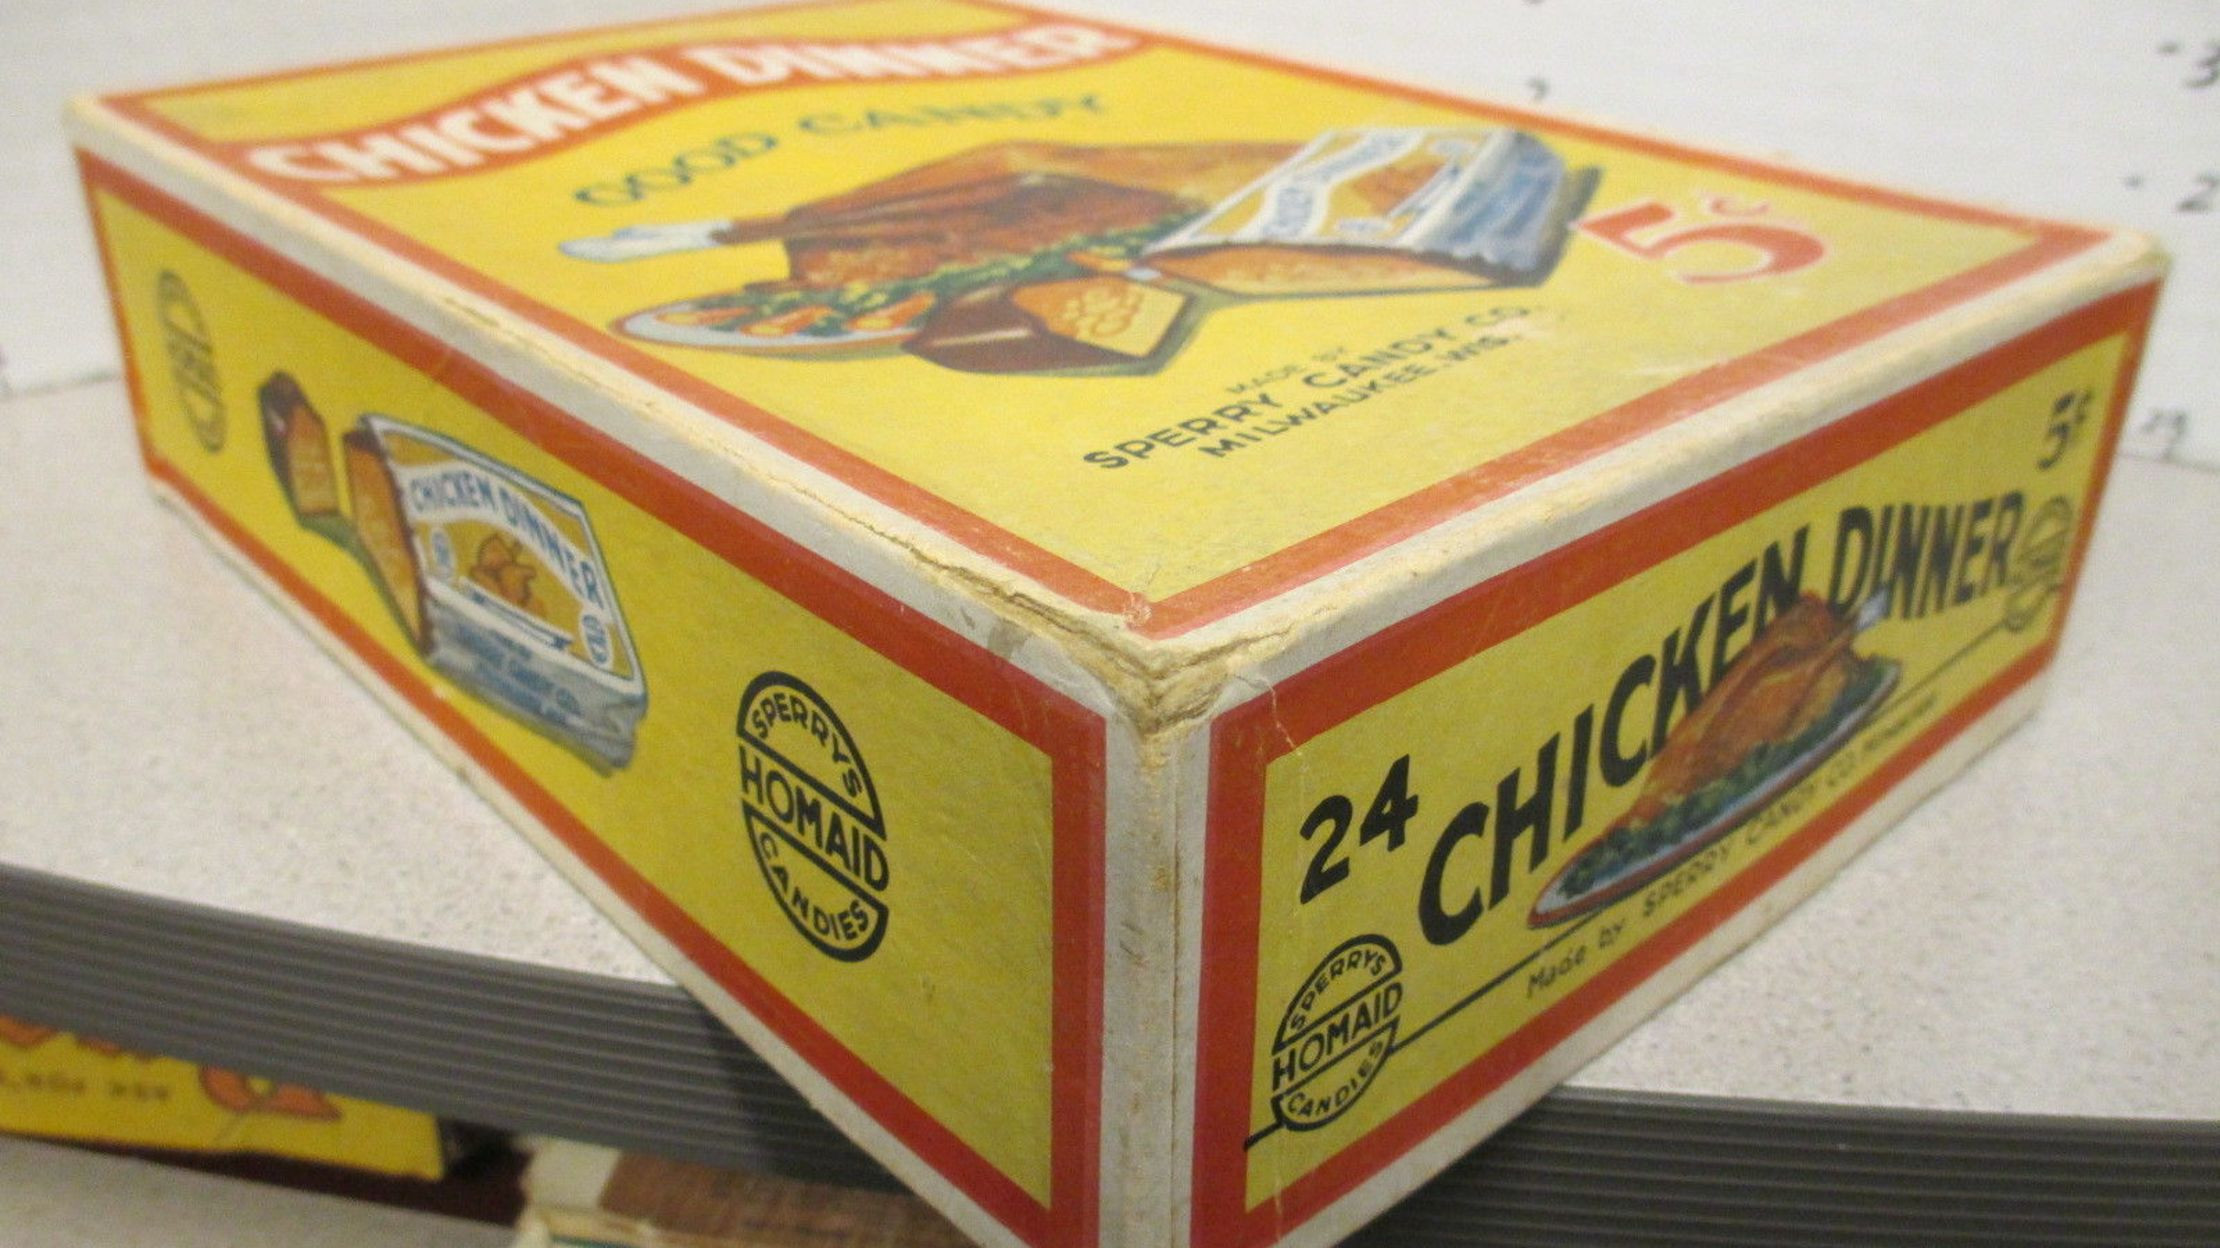 Chicken Dinner Candy Bar
 The Clucking Sweet History of a Candy Bar Called Chicken